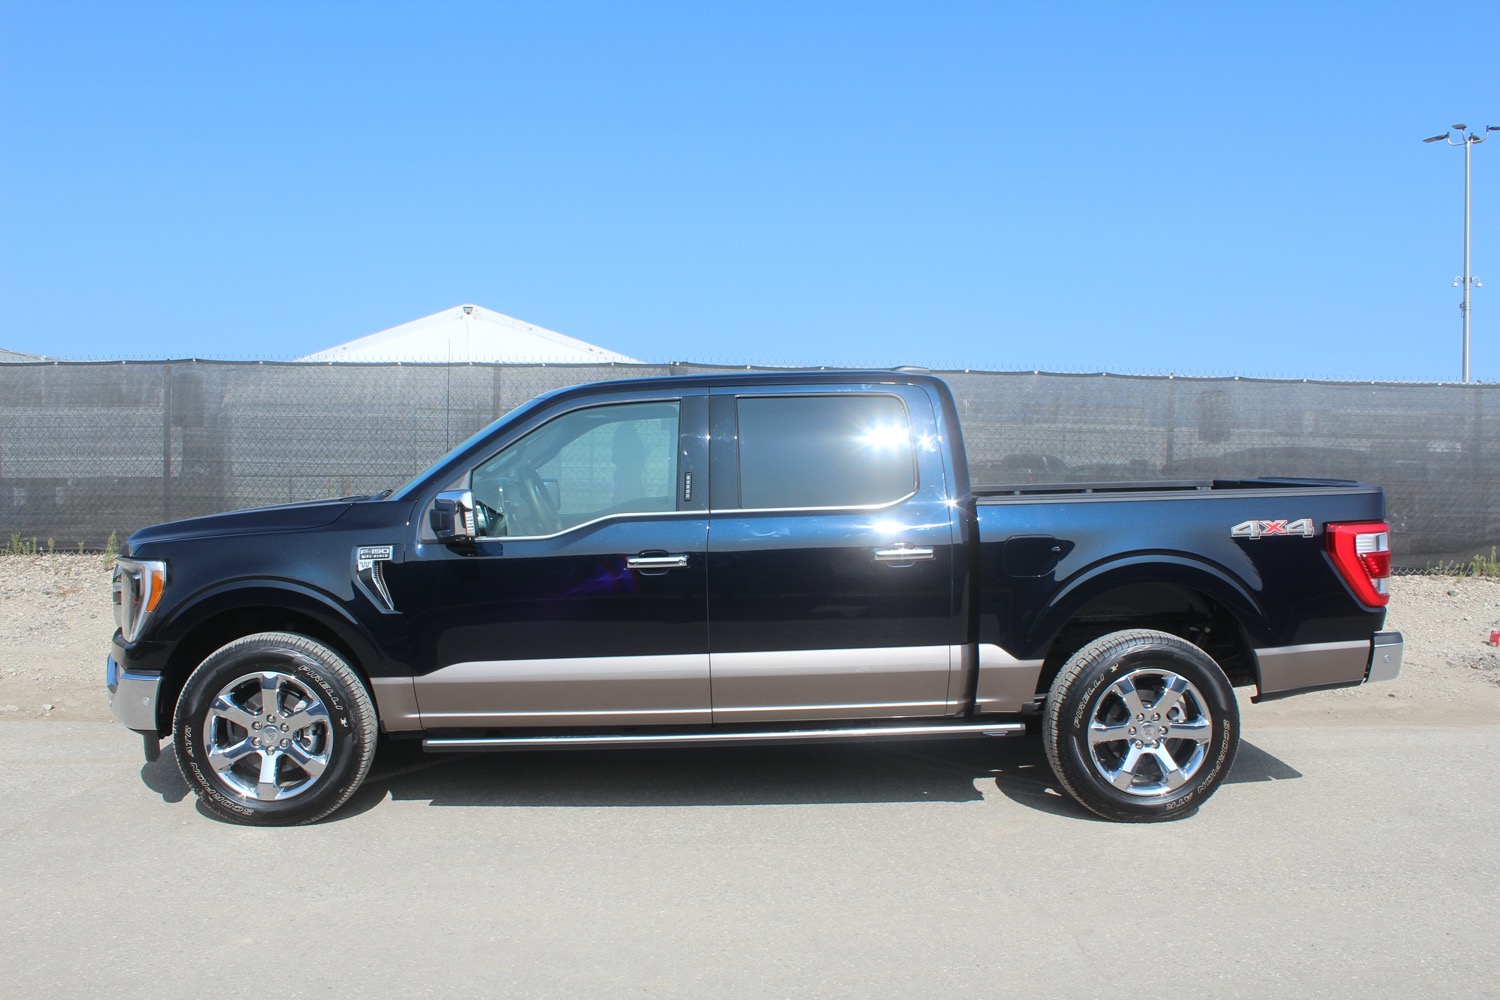 Ford Bronco Antimatter Blue real life look - on 2021 F-150 Antimatter Blue 2021 F-150 King Ranch Chrome 10